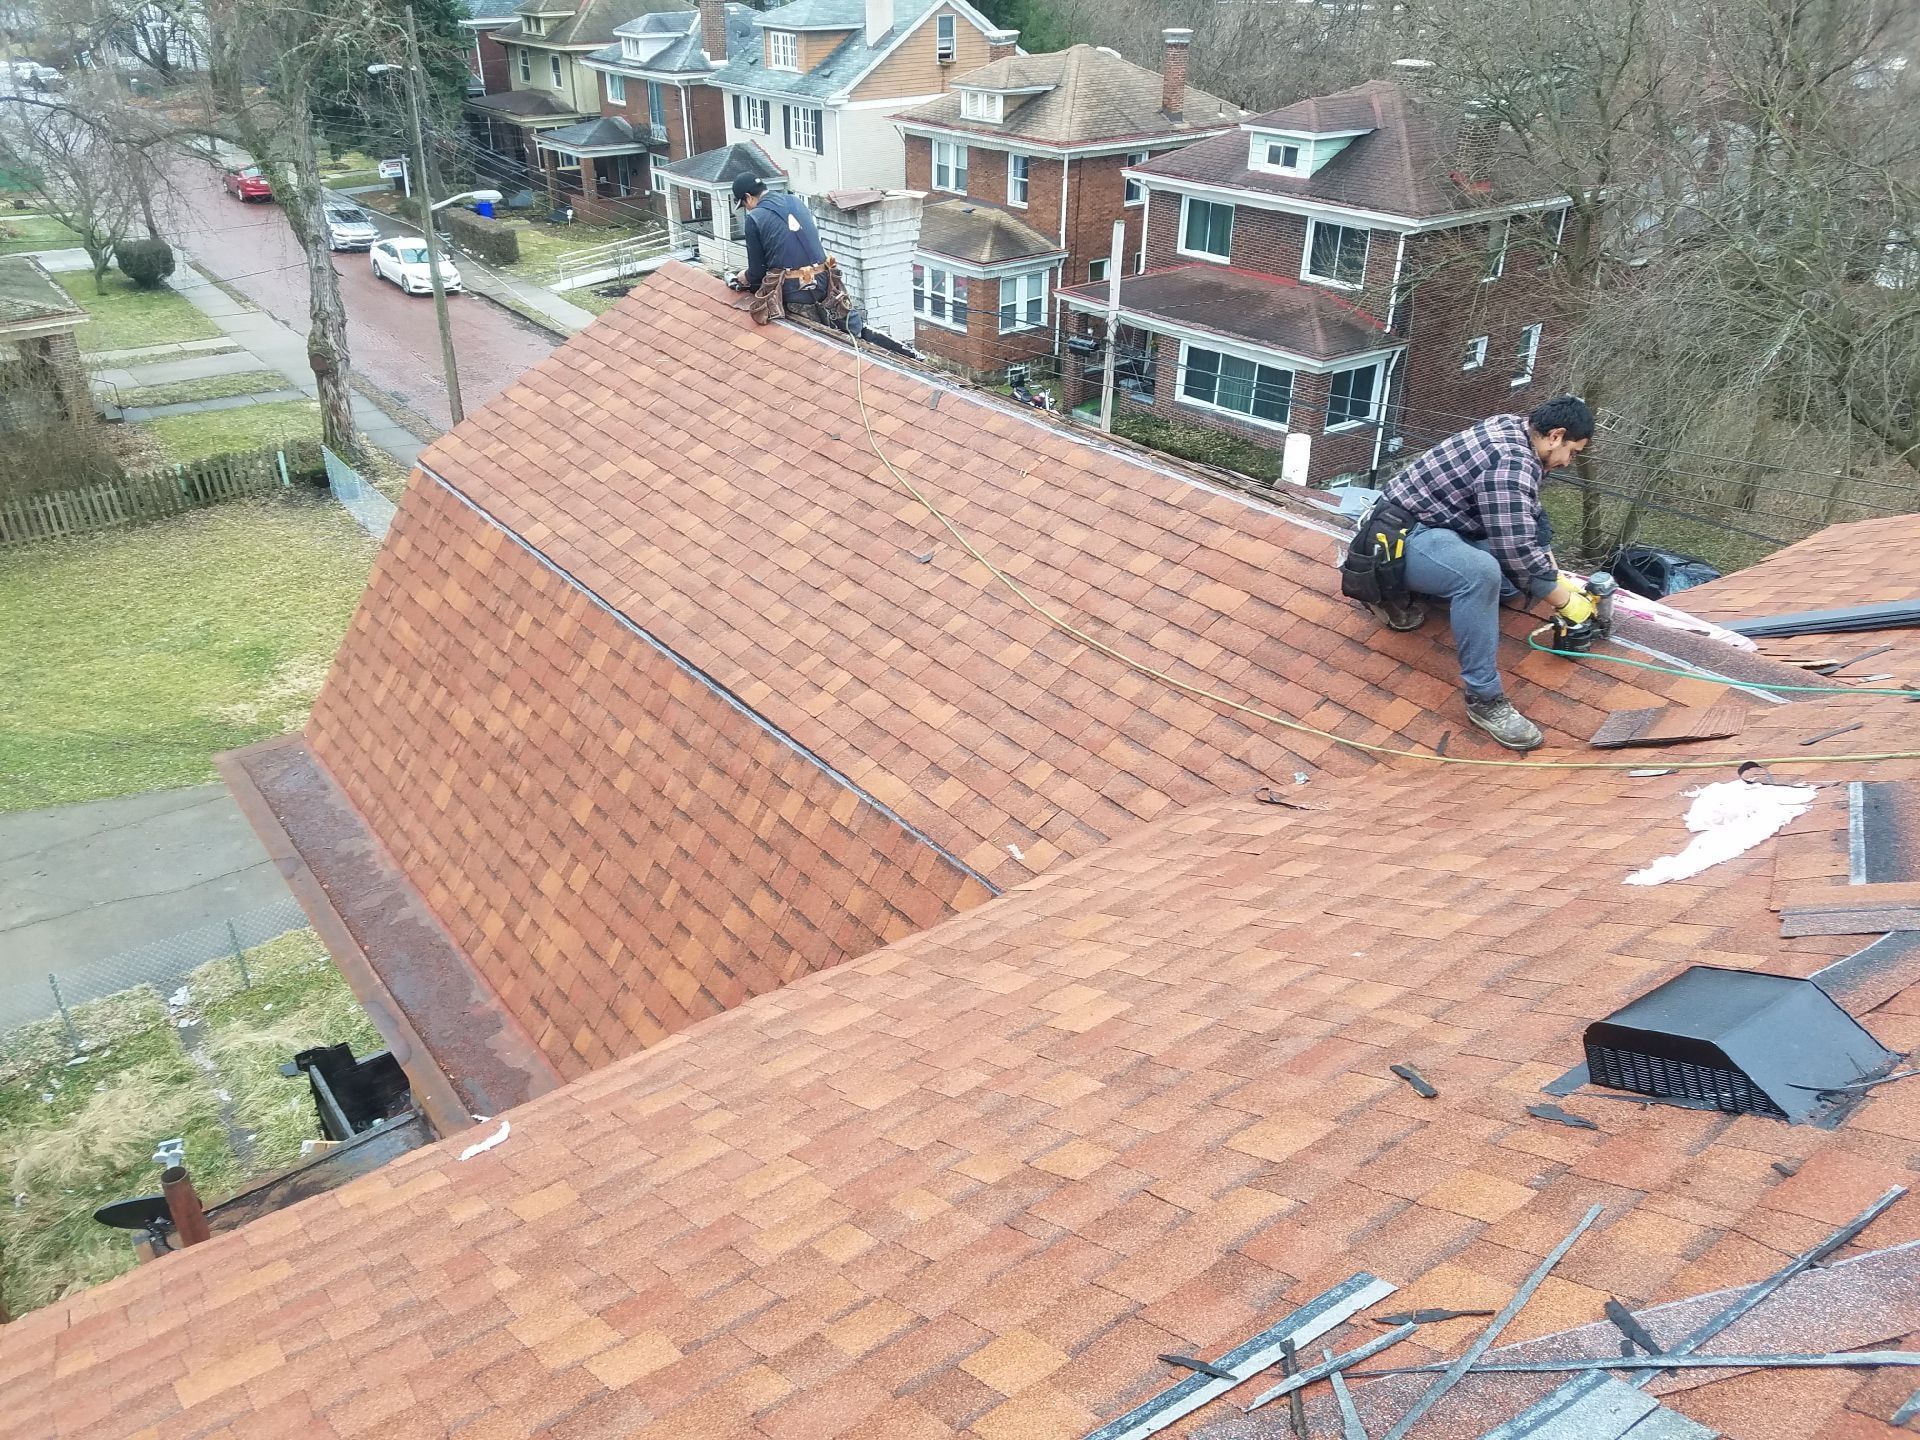 How Do I Choose The Right Roofing Contractor For My Project?